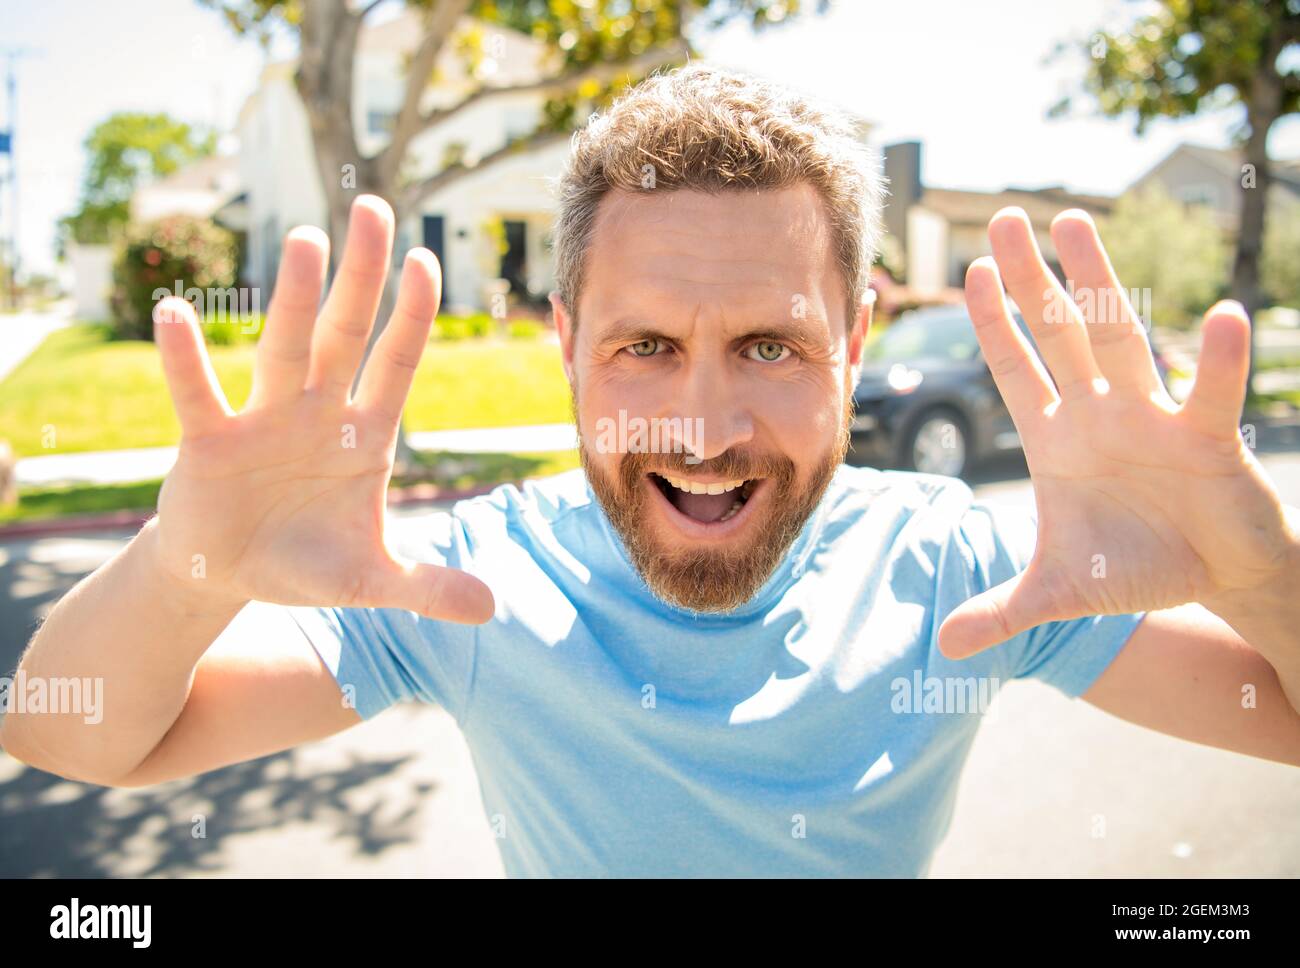 happy man outdoor. express positive emotions. smiling man with beard. male closeup face portrait. Stock Photo